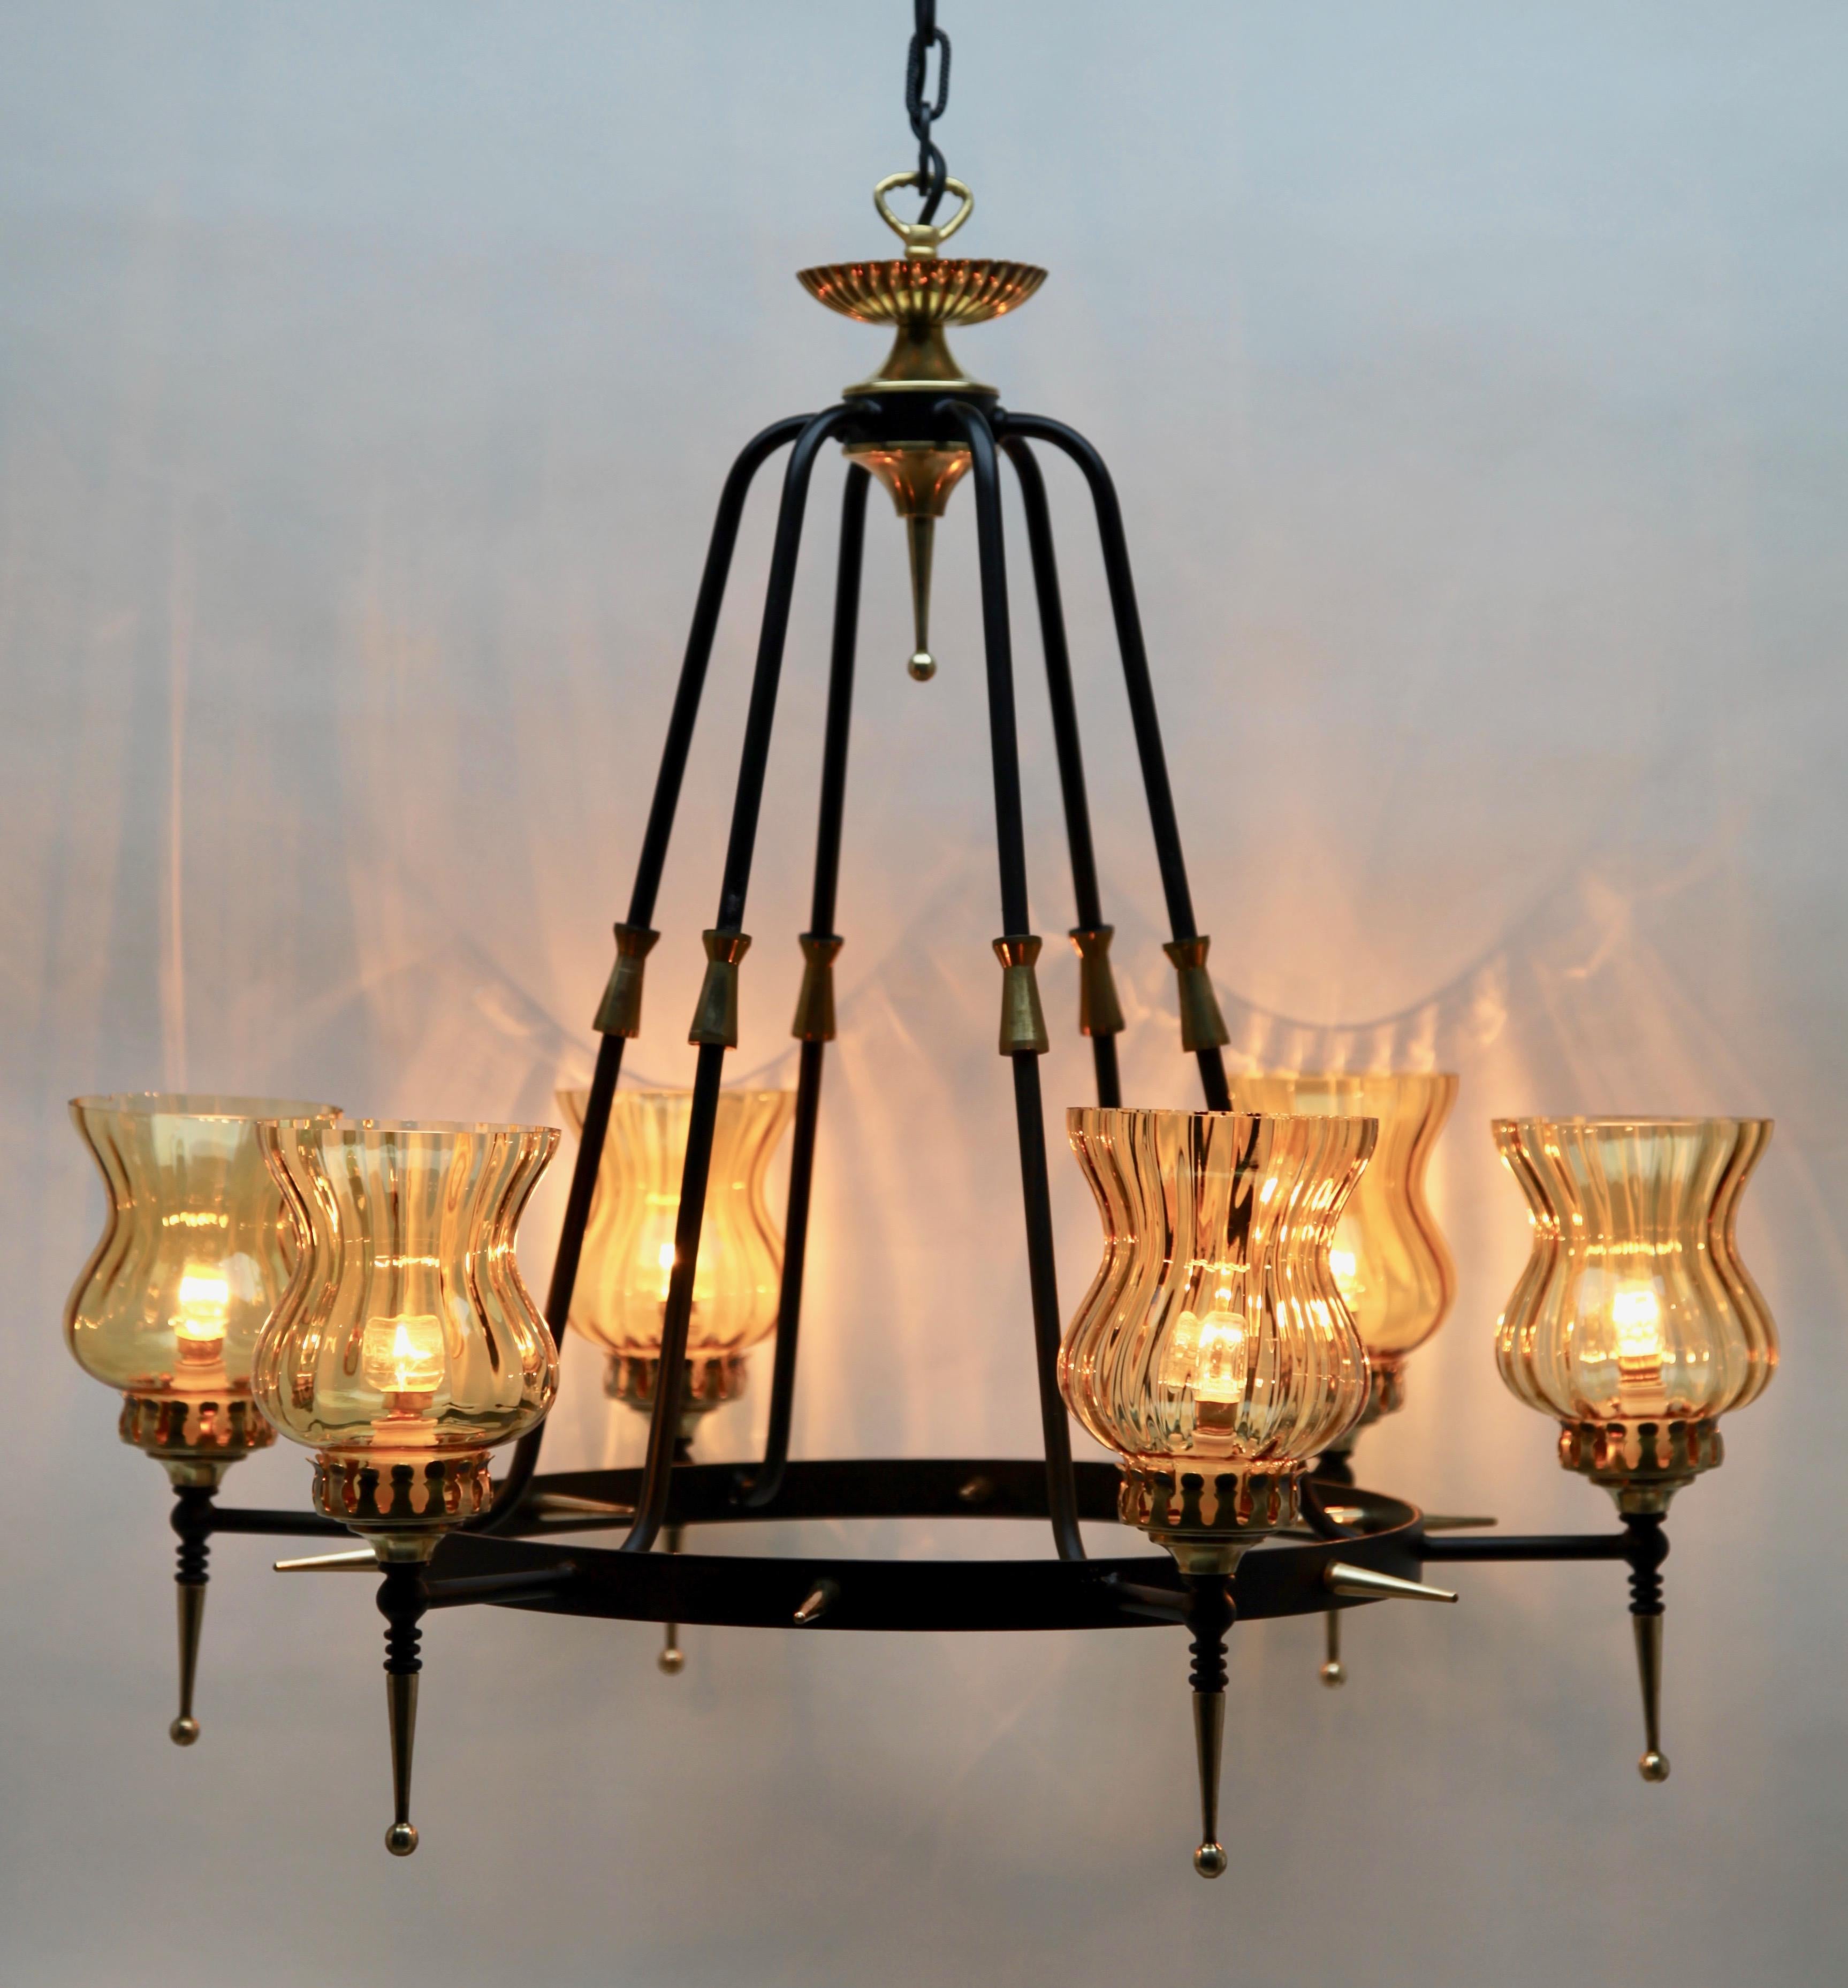 Opaline Glass Pendant Light Forget Metal and Solid Brass Details Whit Optical Lampshades For Sale